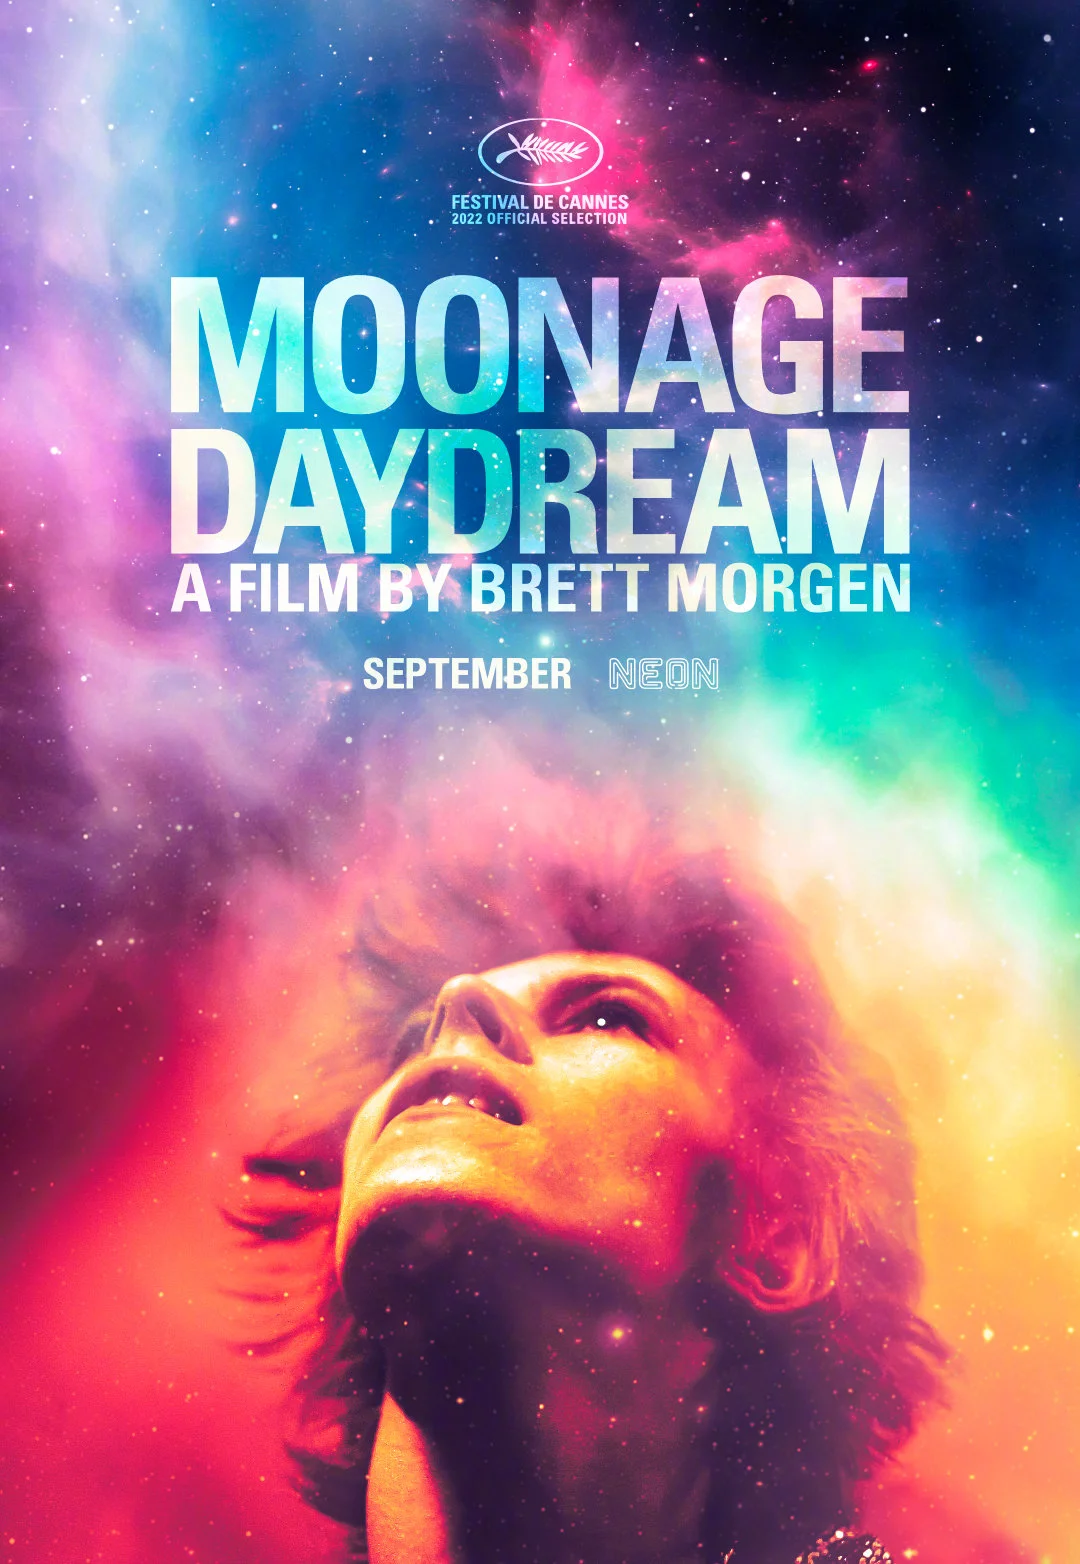 Documentary "Moonage Daydream" Official Teaser Trailer and poster, it focuses on David Bowie and his musical path